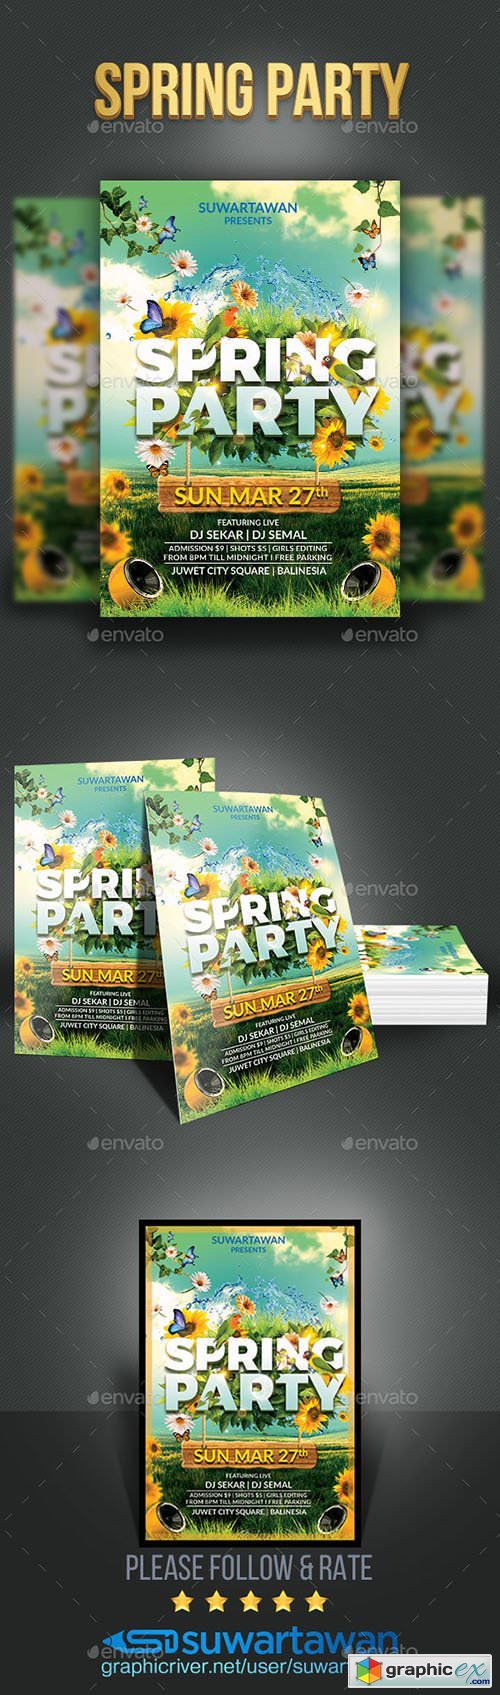 Spring Party | Clubs & Parties